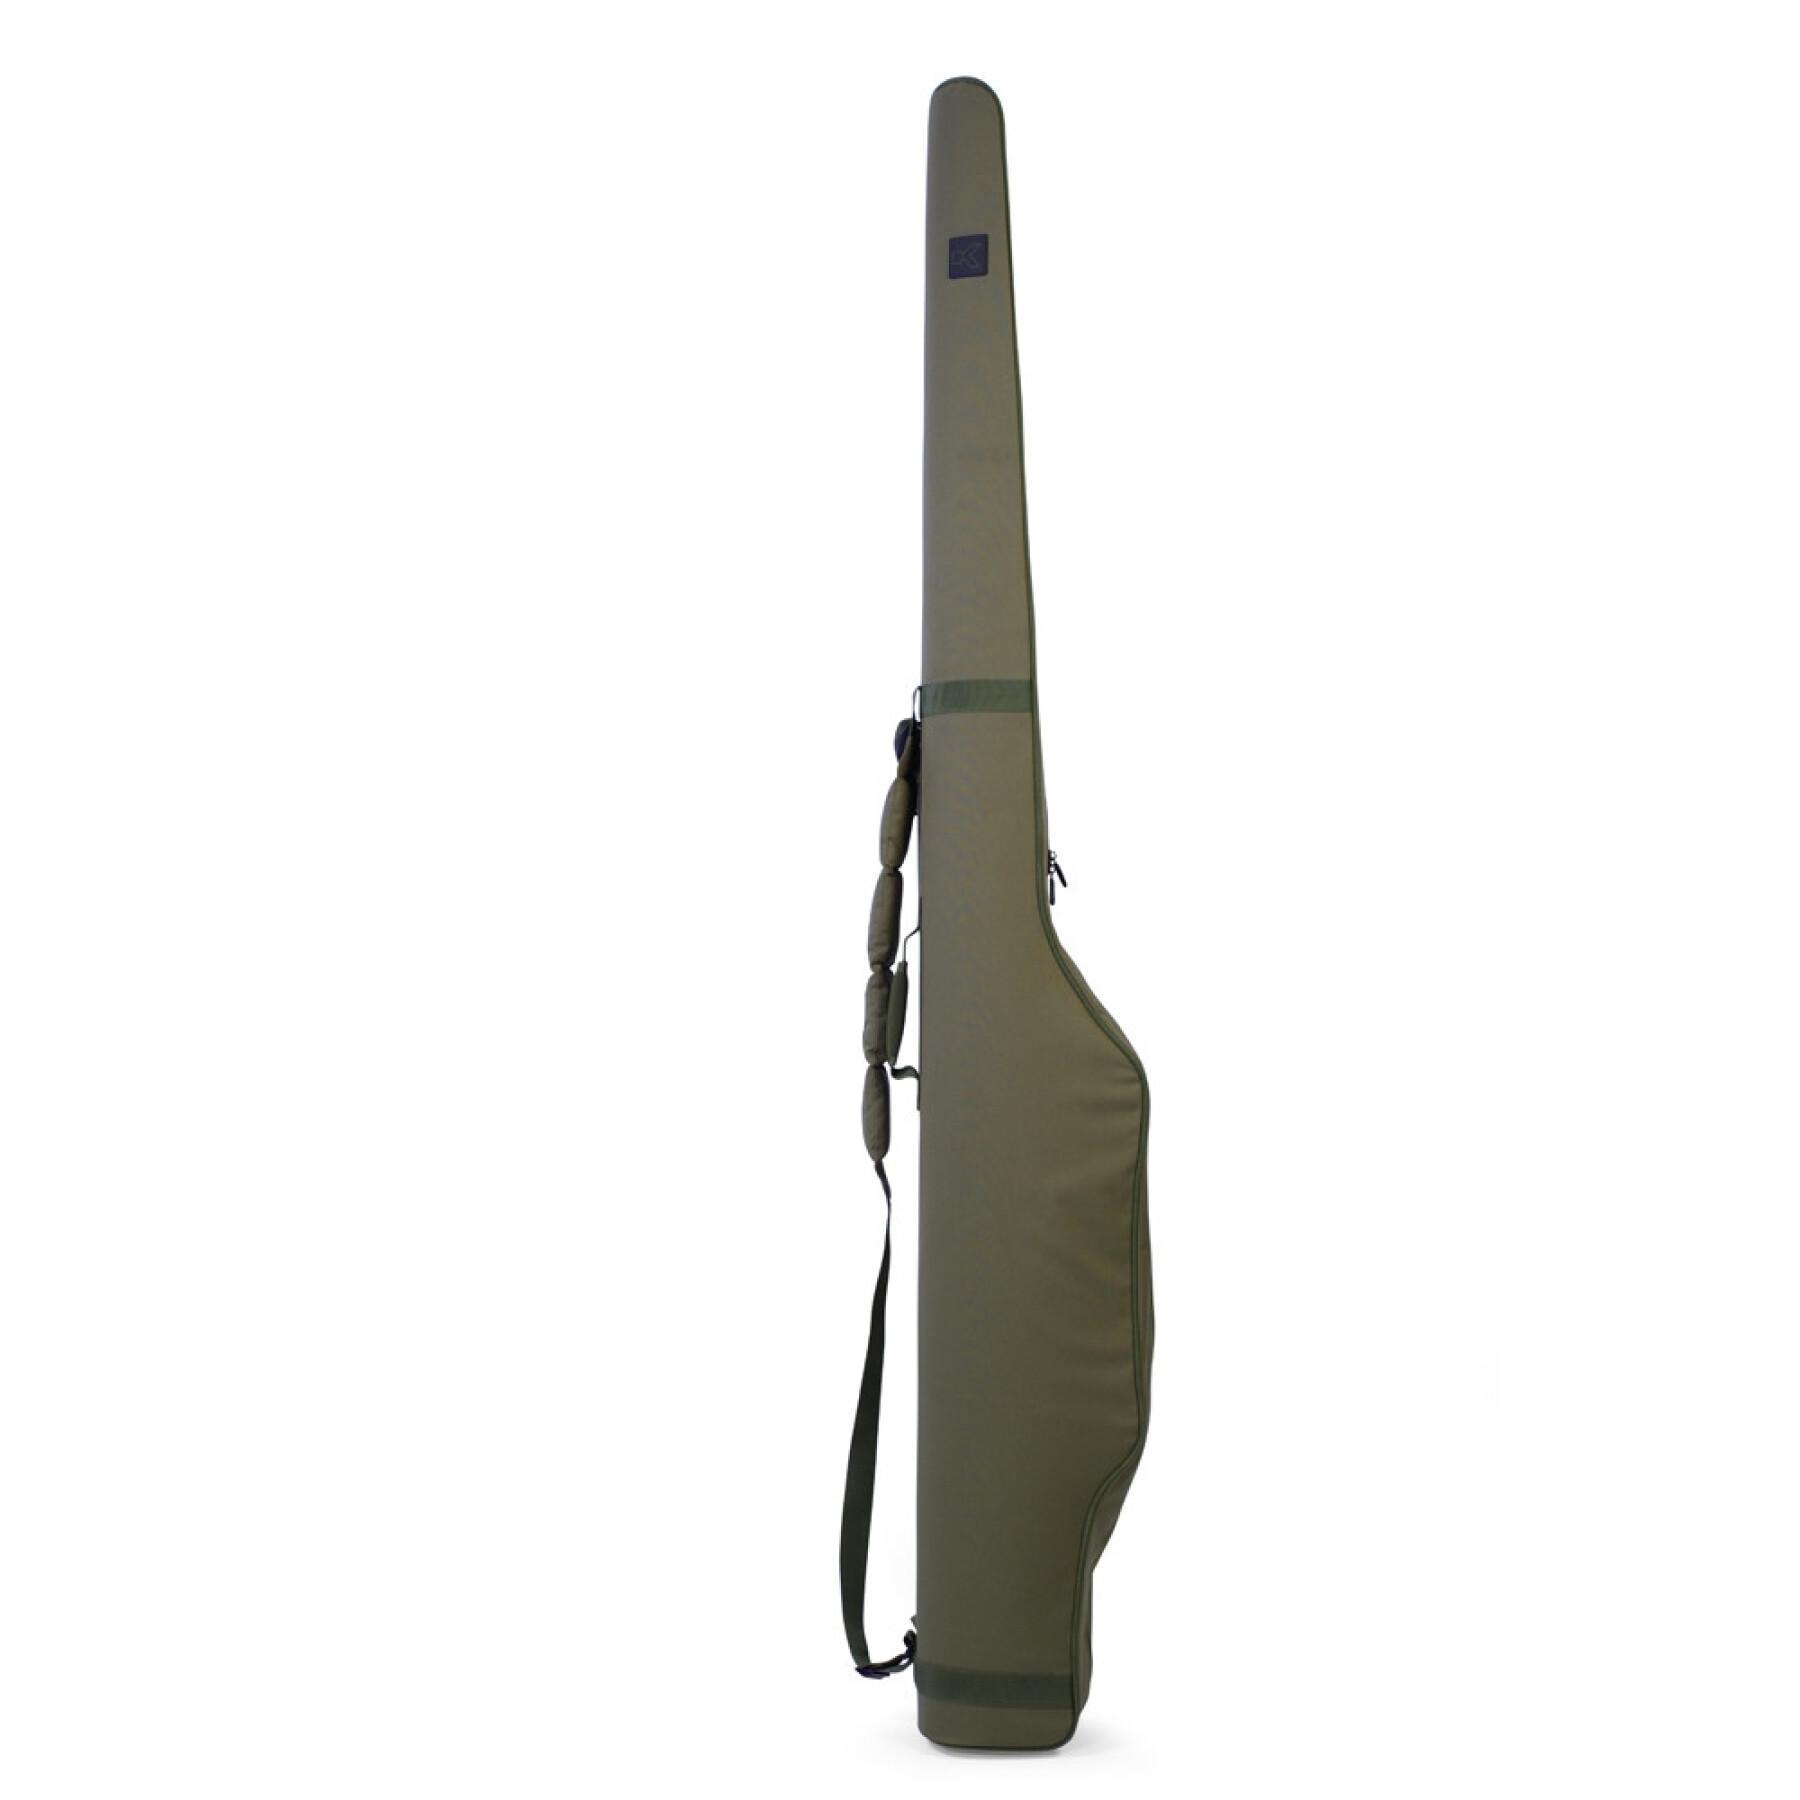 Case for 2 rods Korum Total Protection